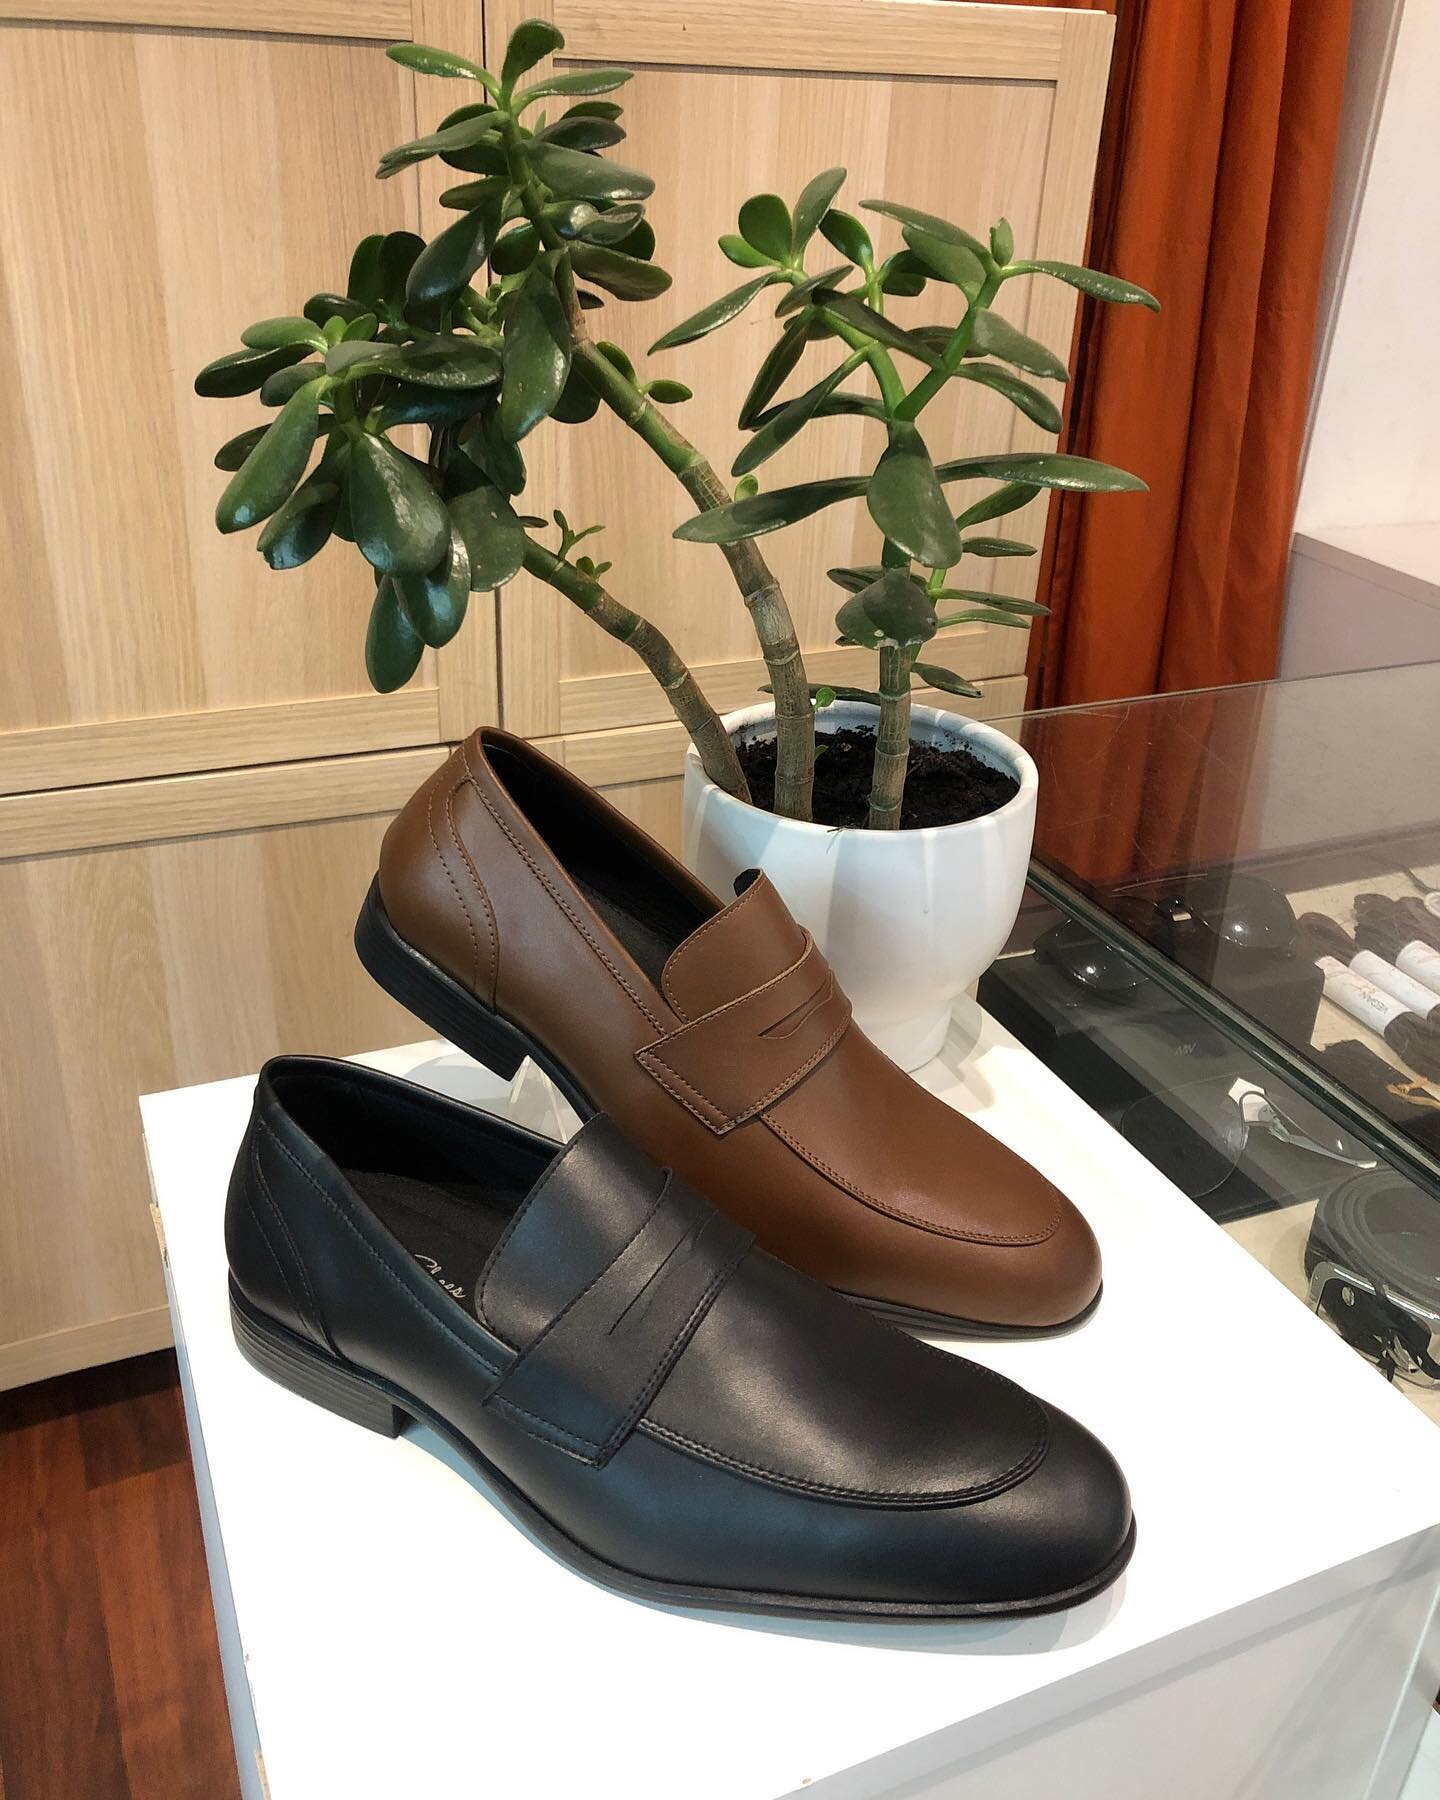 Introducing two new elegant men's styles - the Jean-Luc loafers and the Adrian oxford shoes.

These shoes embody sophistication while staying true to our commitment to style, ethics, and sustainability. Both pairs feature cushioned insoles and flexib